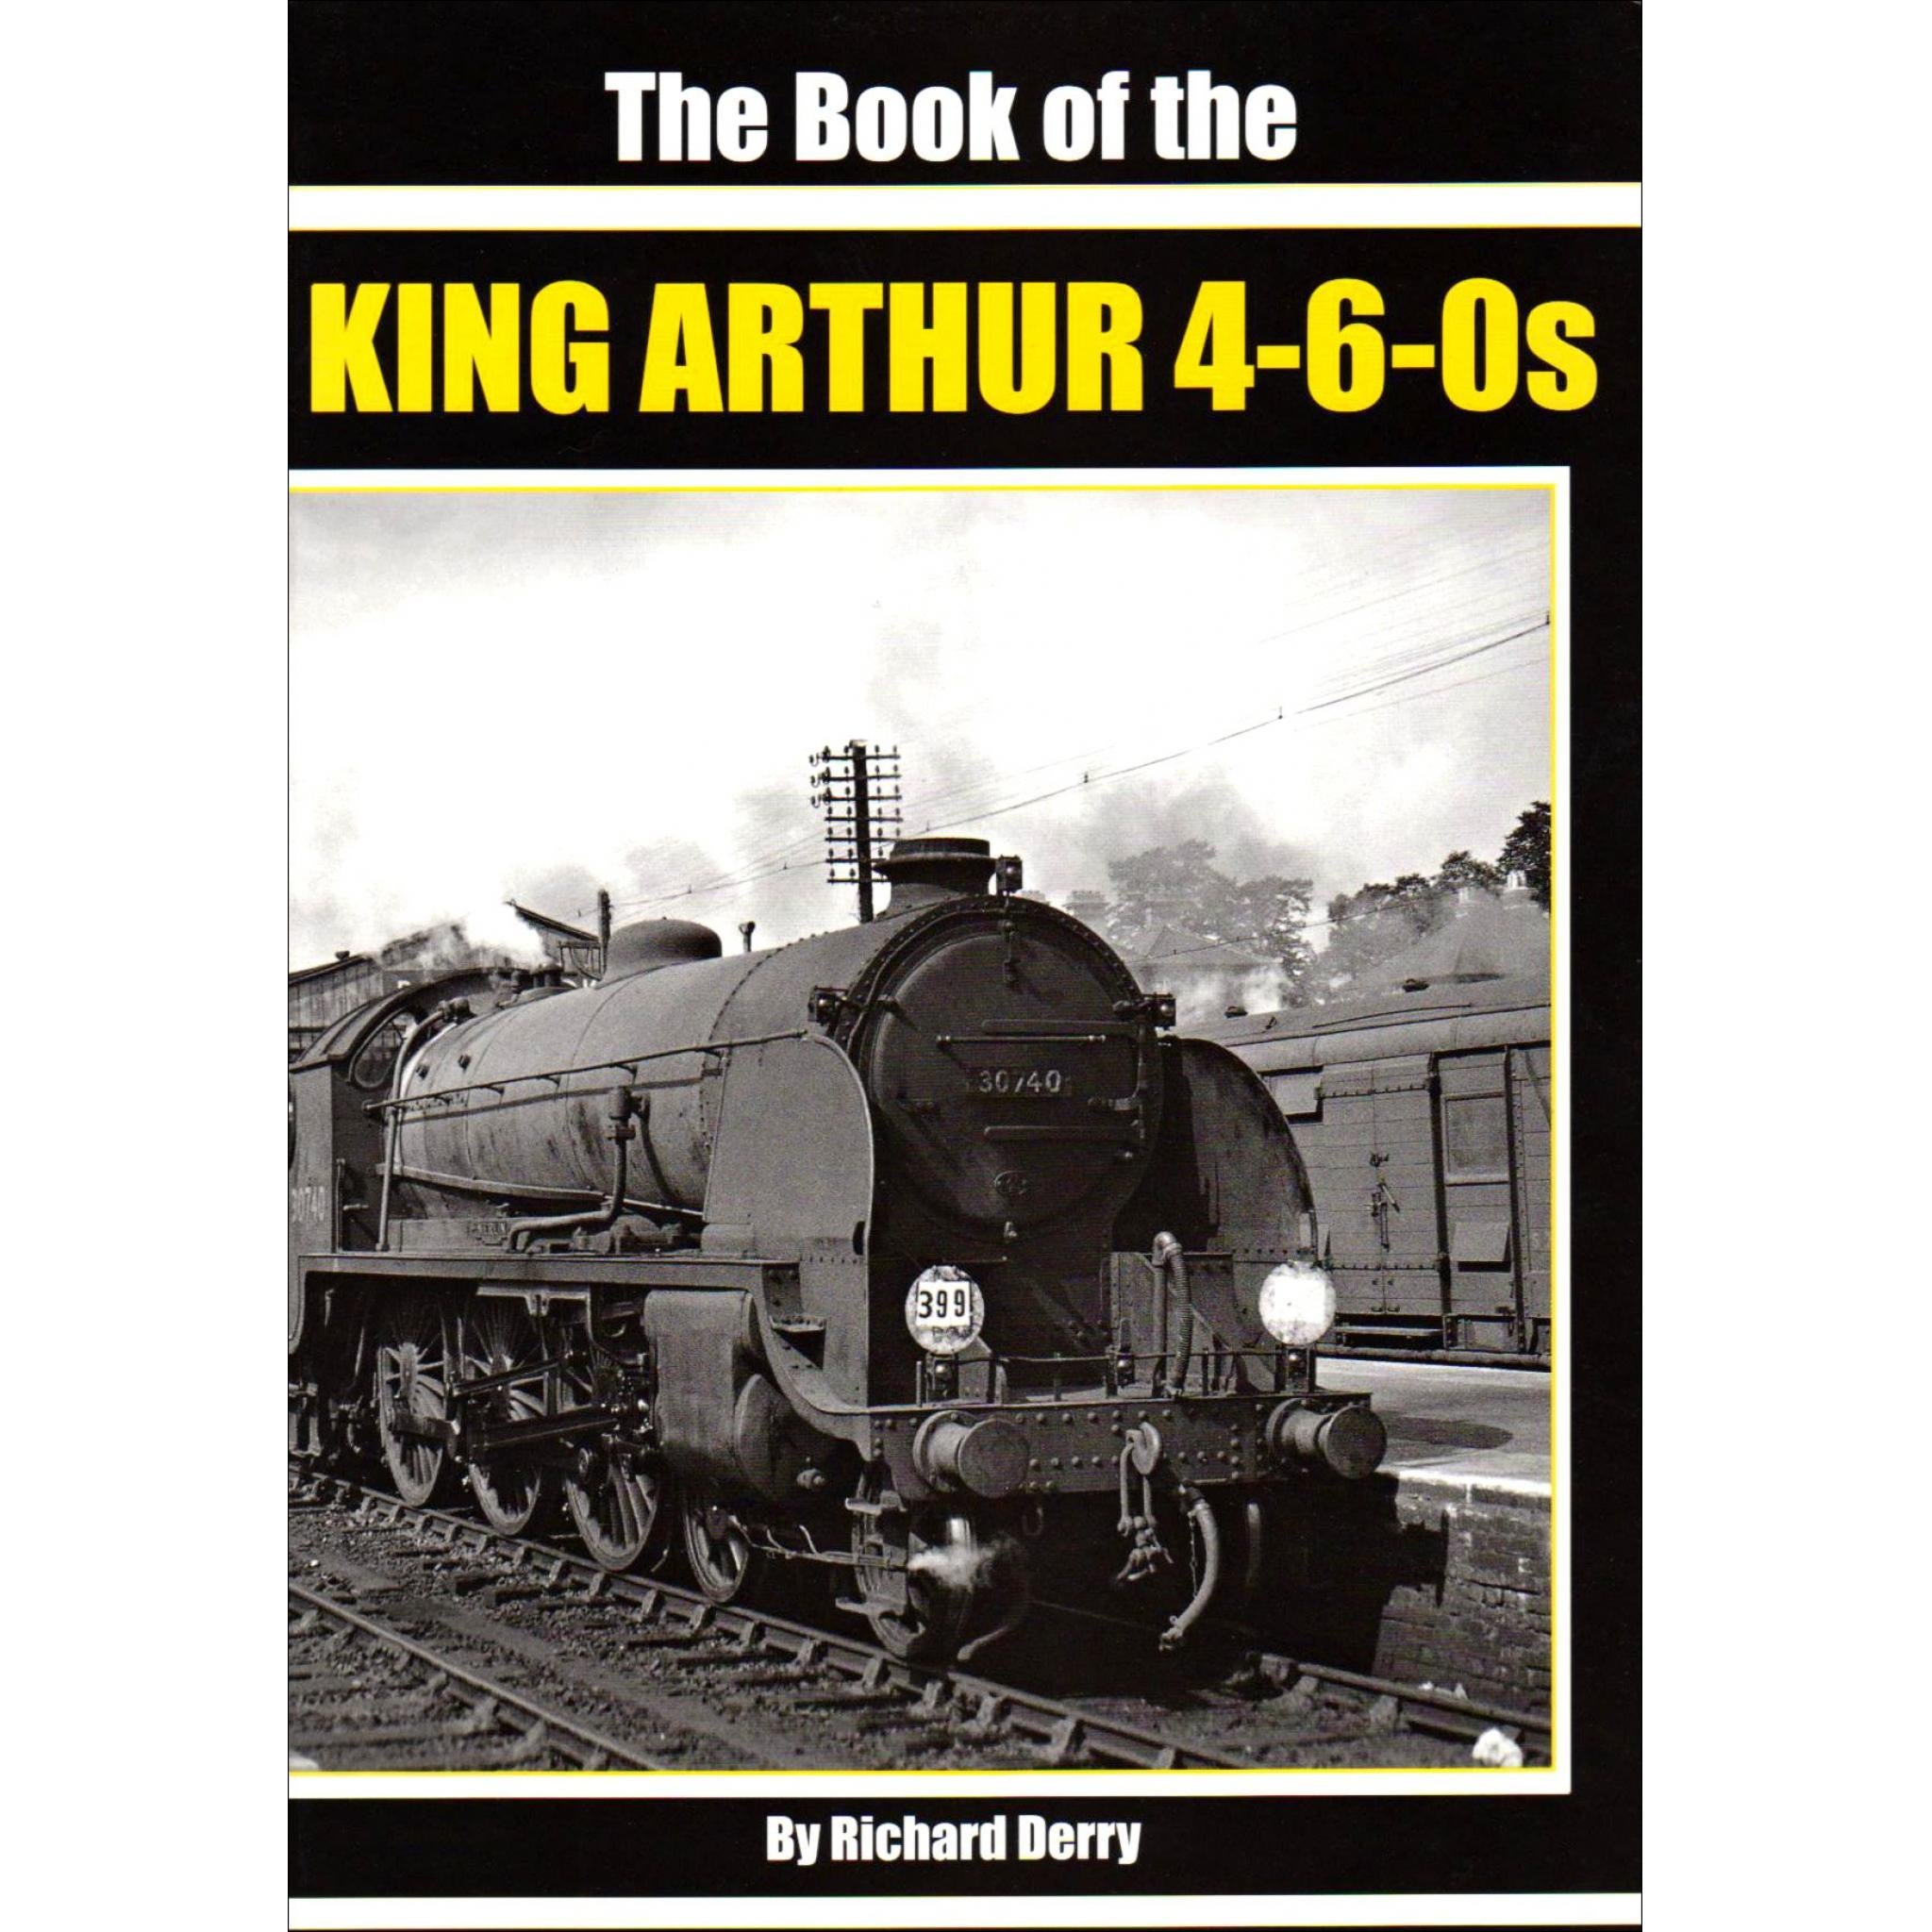 THE BOOK OF THE KING ARTHUR 4-6-0s